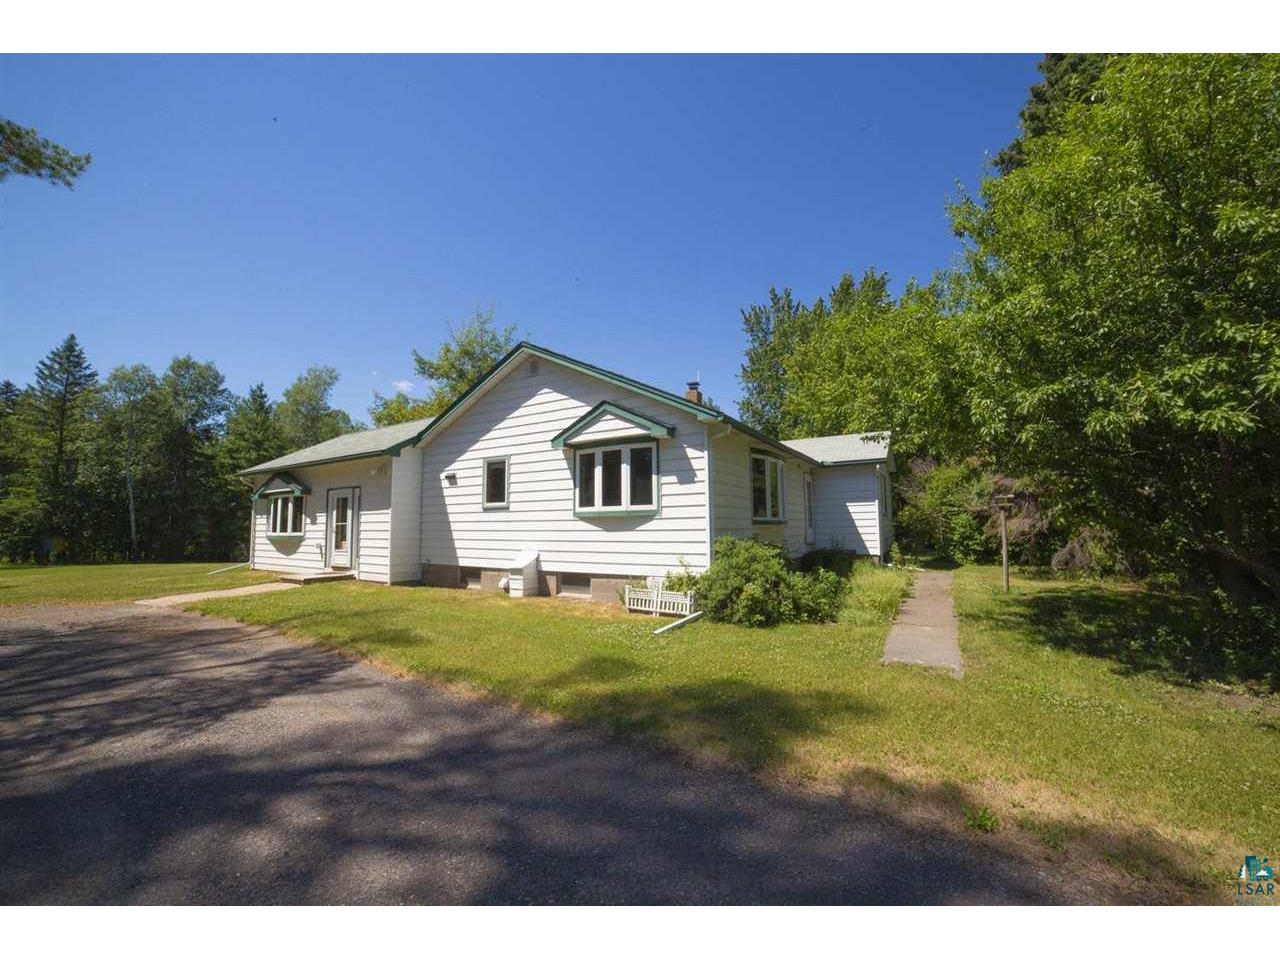 7255 Hwy 5 Floodwood MN 55736 - Whiteface 6098015 image1